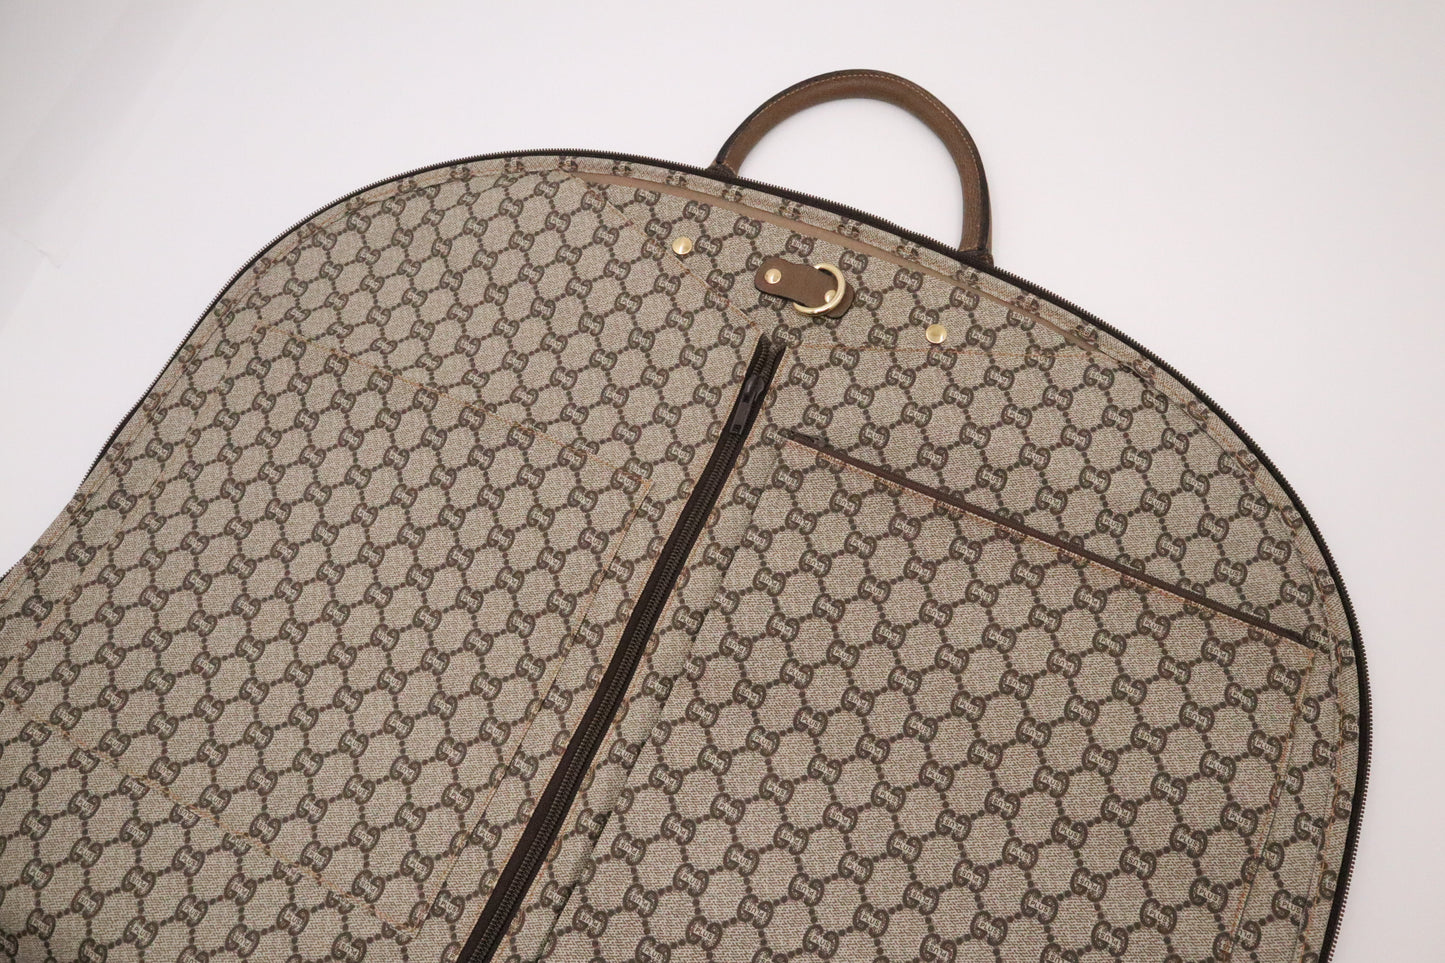 Gucci Plus Travel Garment Bag in Coated Canvas